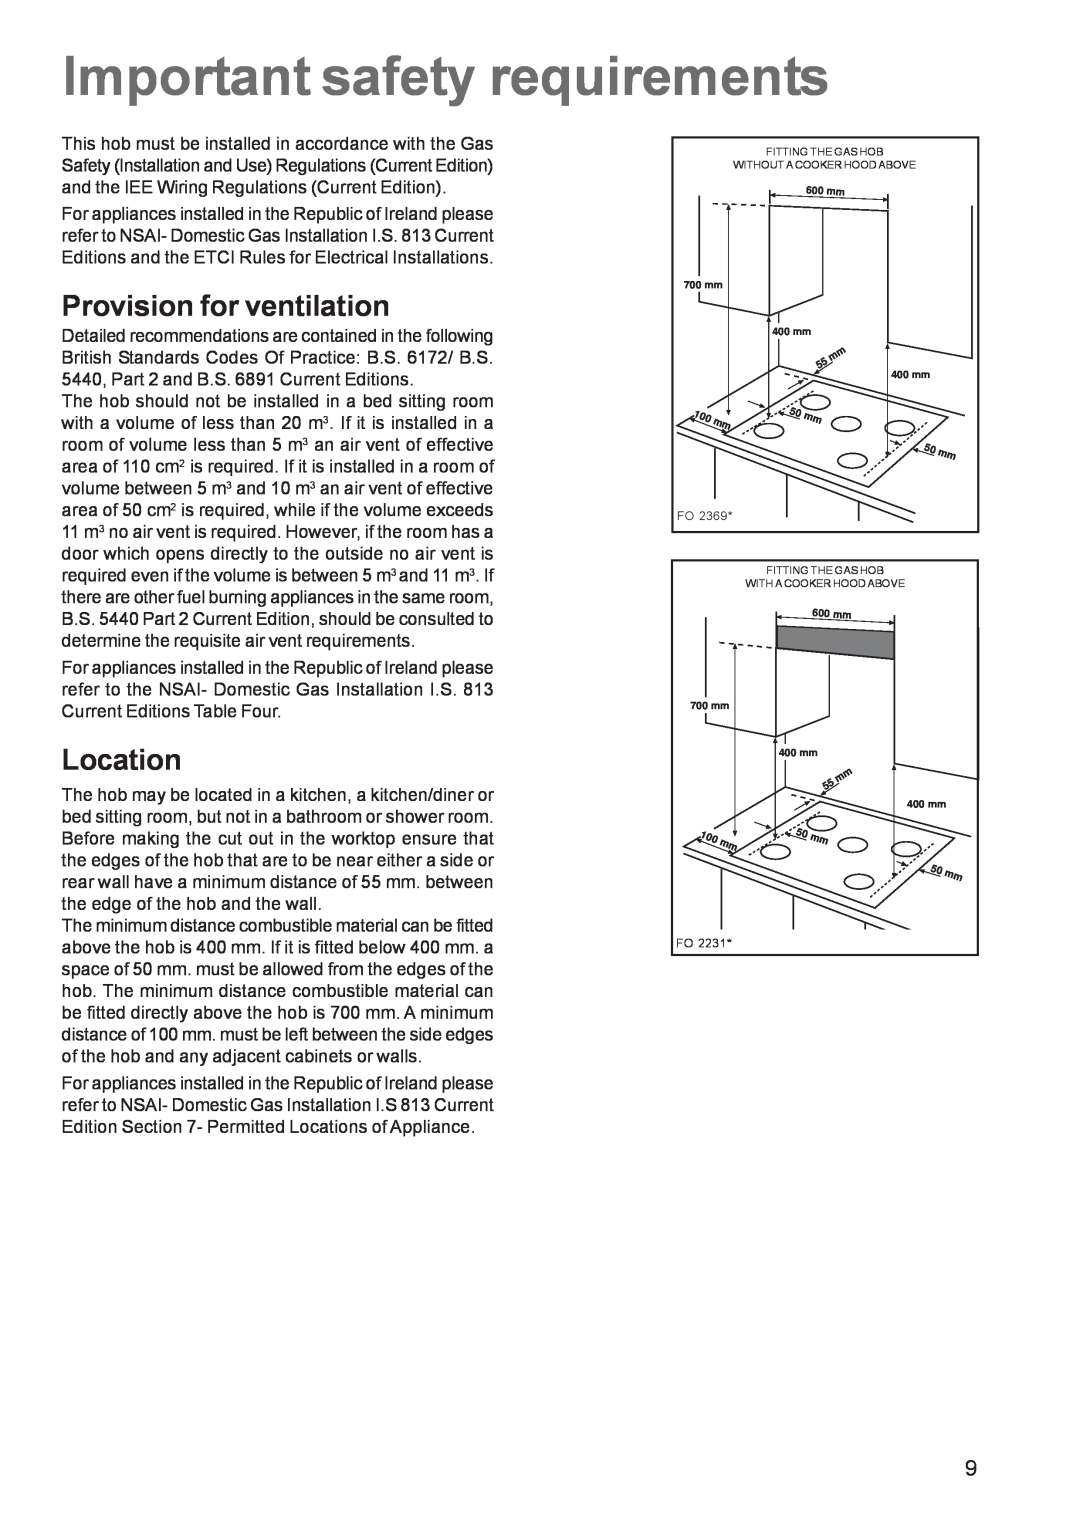 Electrolux EHG 7763 manual Important safety requirements, Provision for ventilation, Location 